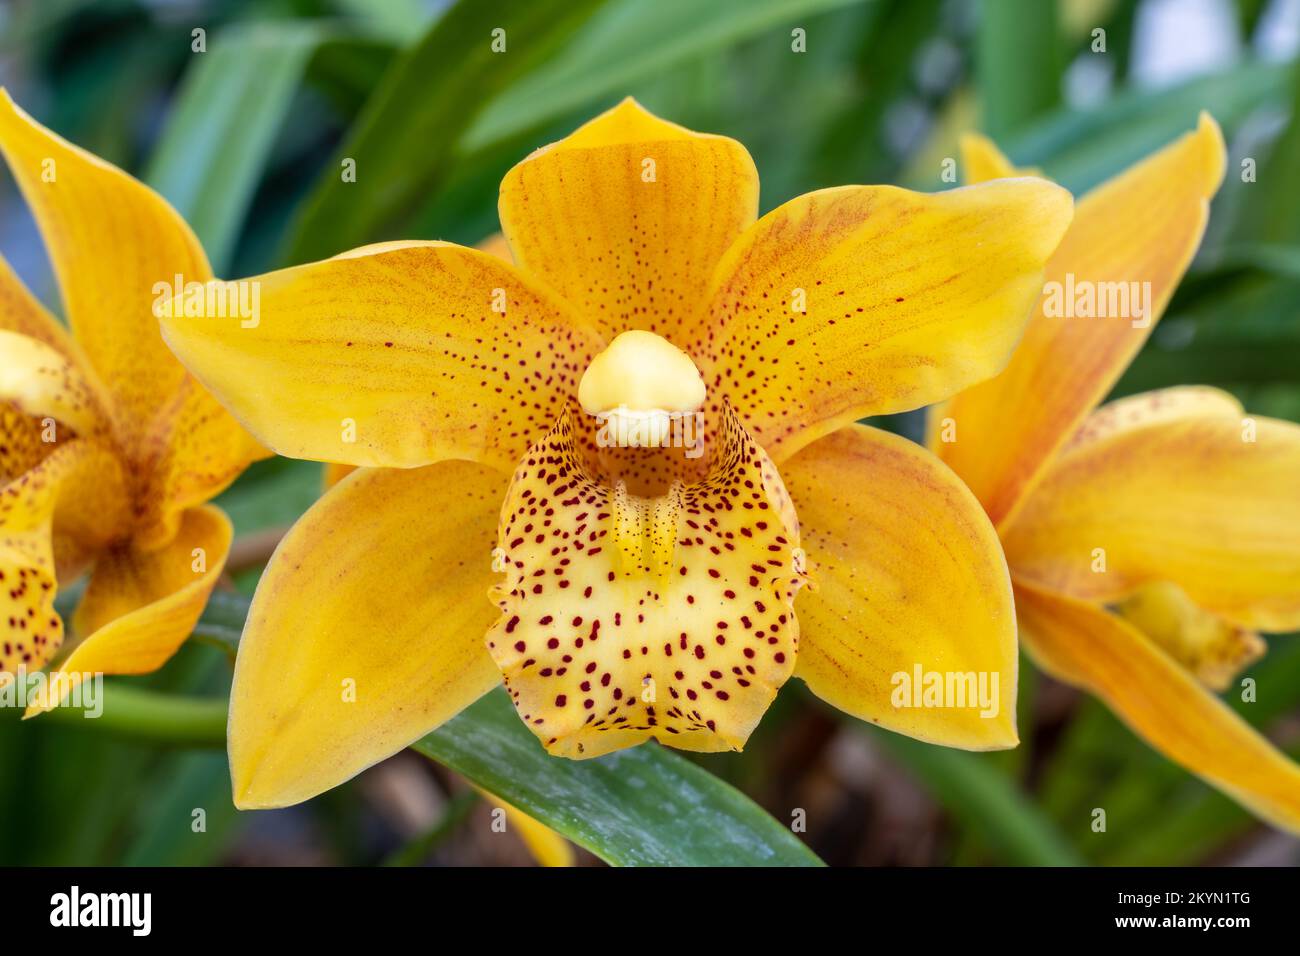 Closeup view of colorful yellow orange and brown flower of cymbidium hybrid aka boat orchid blooming in garden outdoors Stock Photo